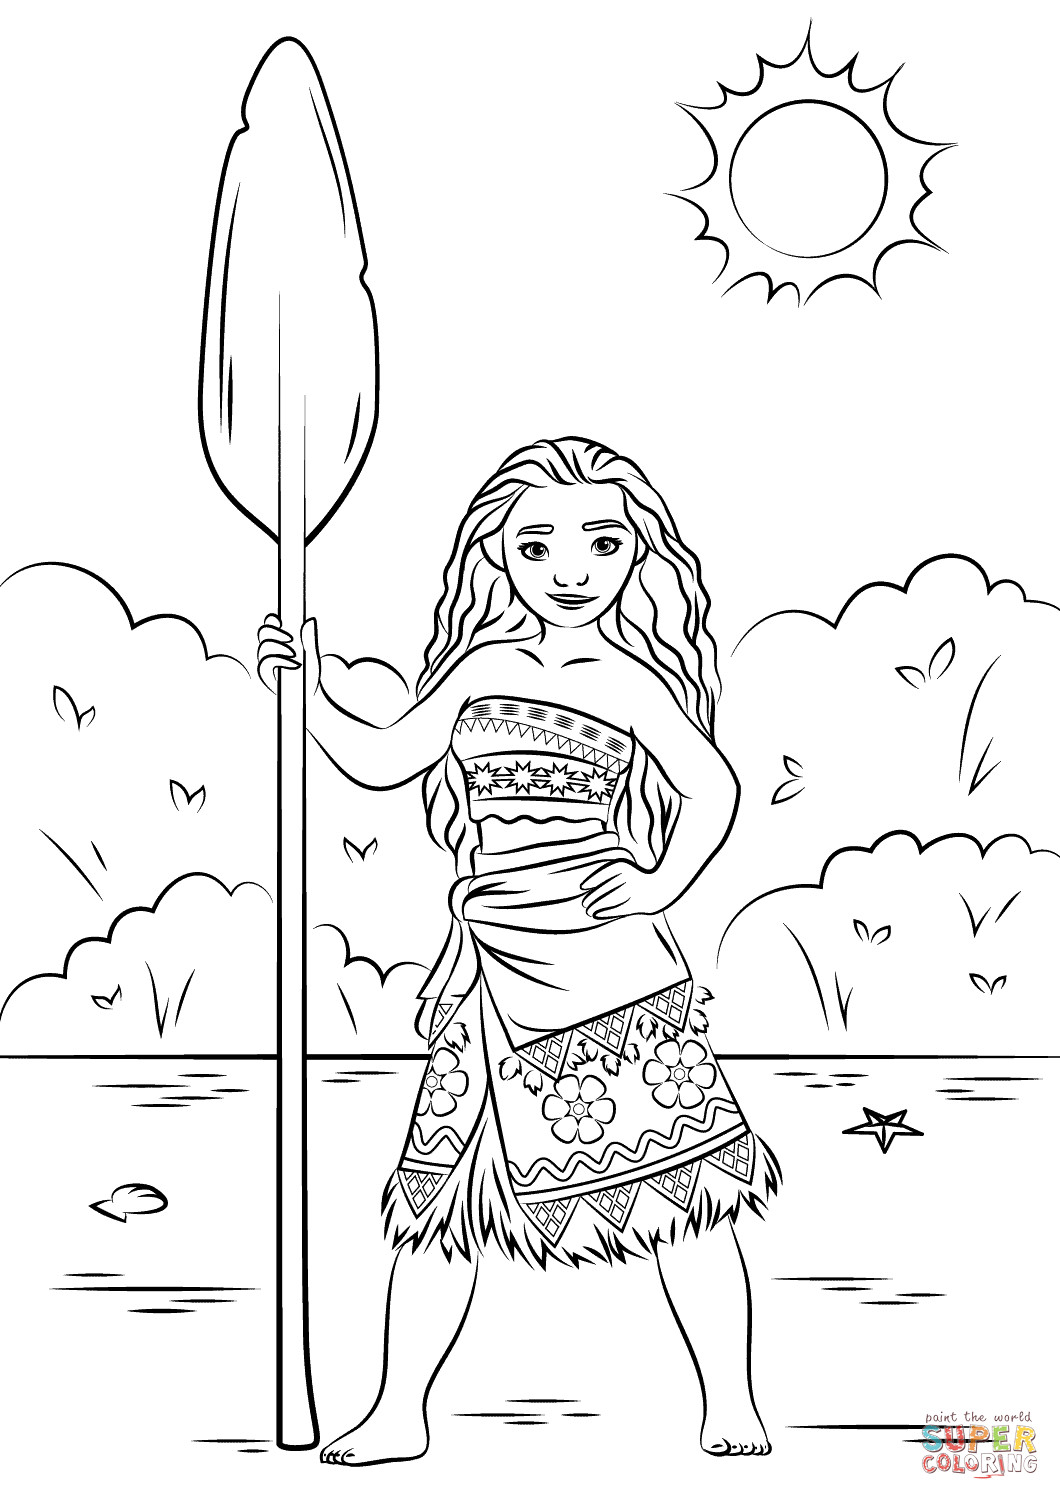 Moana Coloring Pages For Toddlers
 Princess Moana coloring page